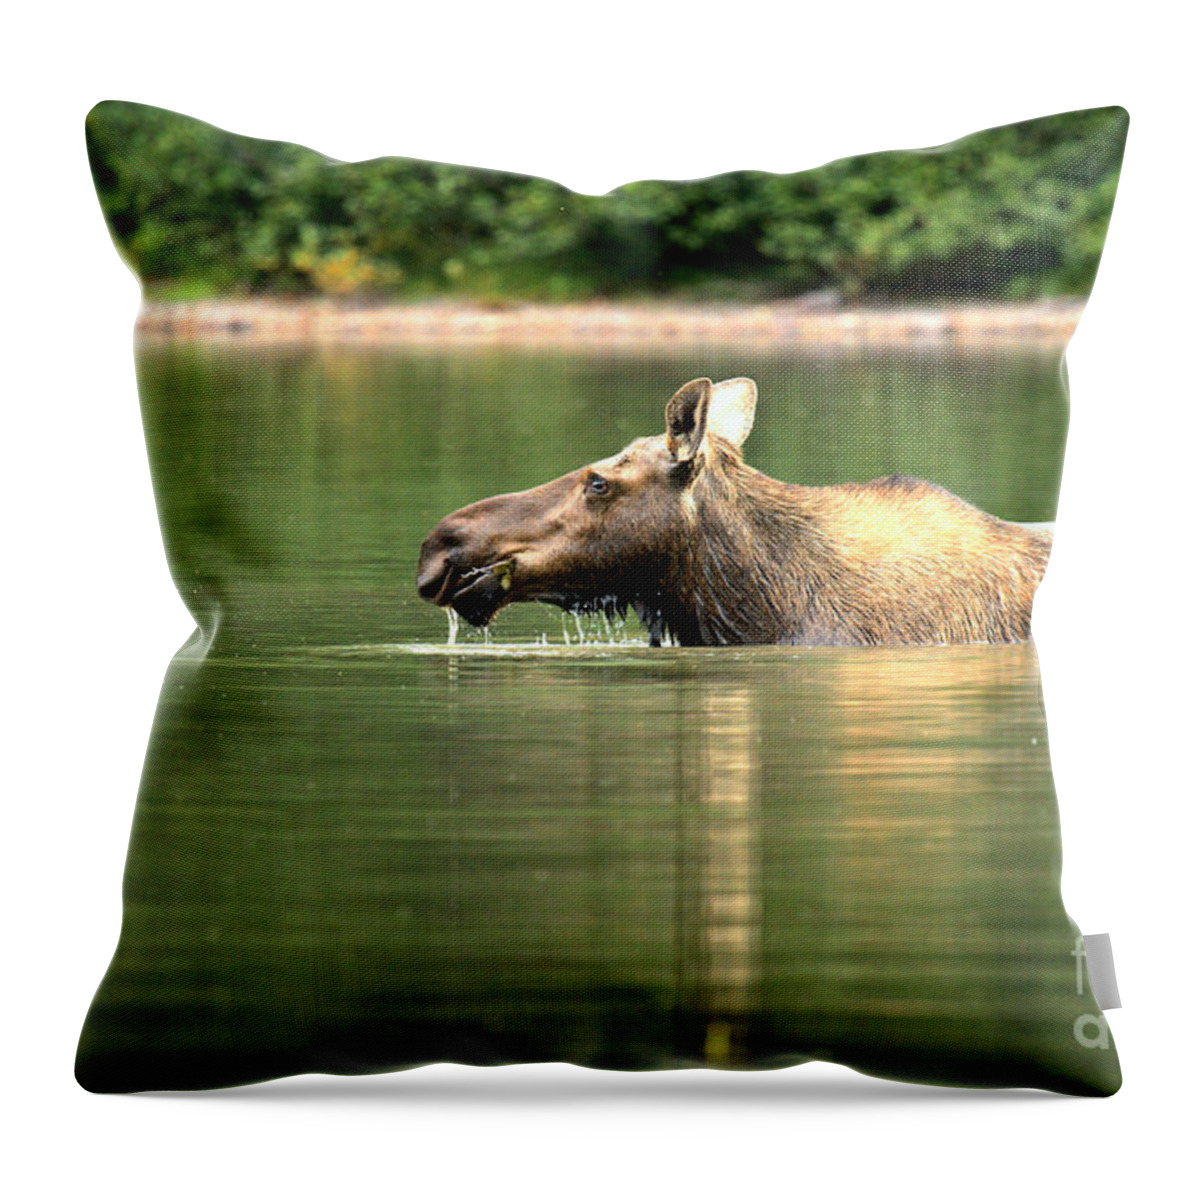  Throw Pillow featuring the photograph Many Glacier Moose 8 by Adam Jewell